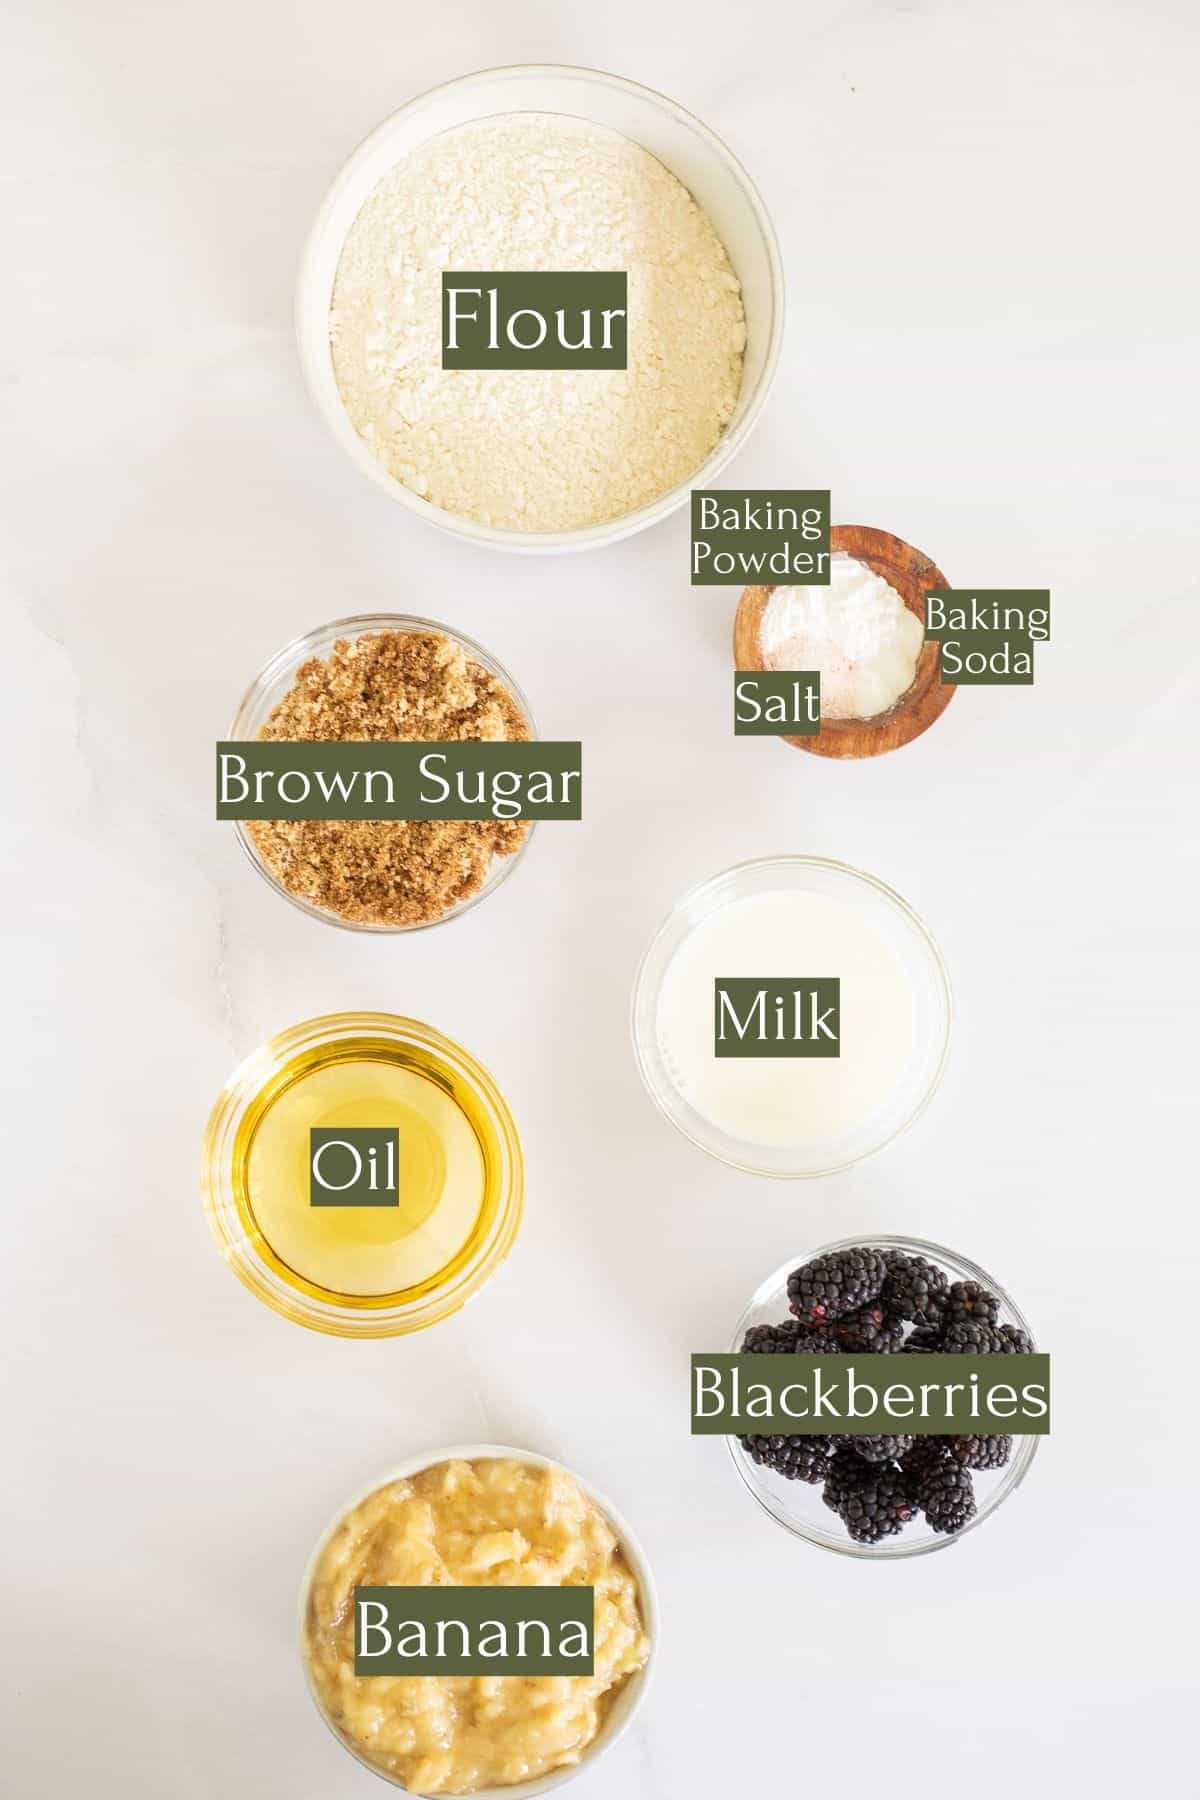 ingredients to make blackberry banana bread labeled with green text boxes.